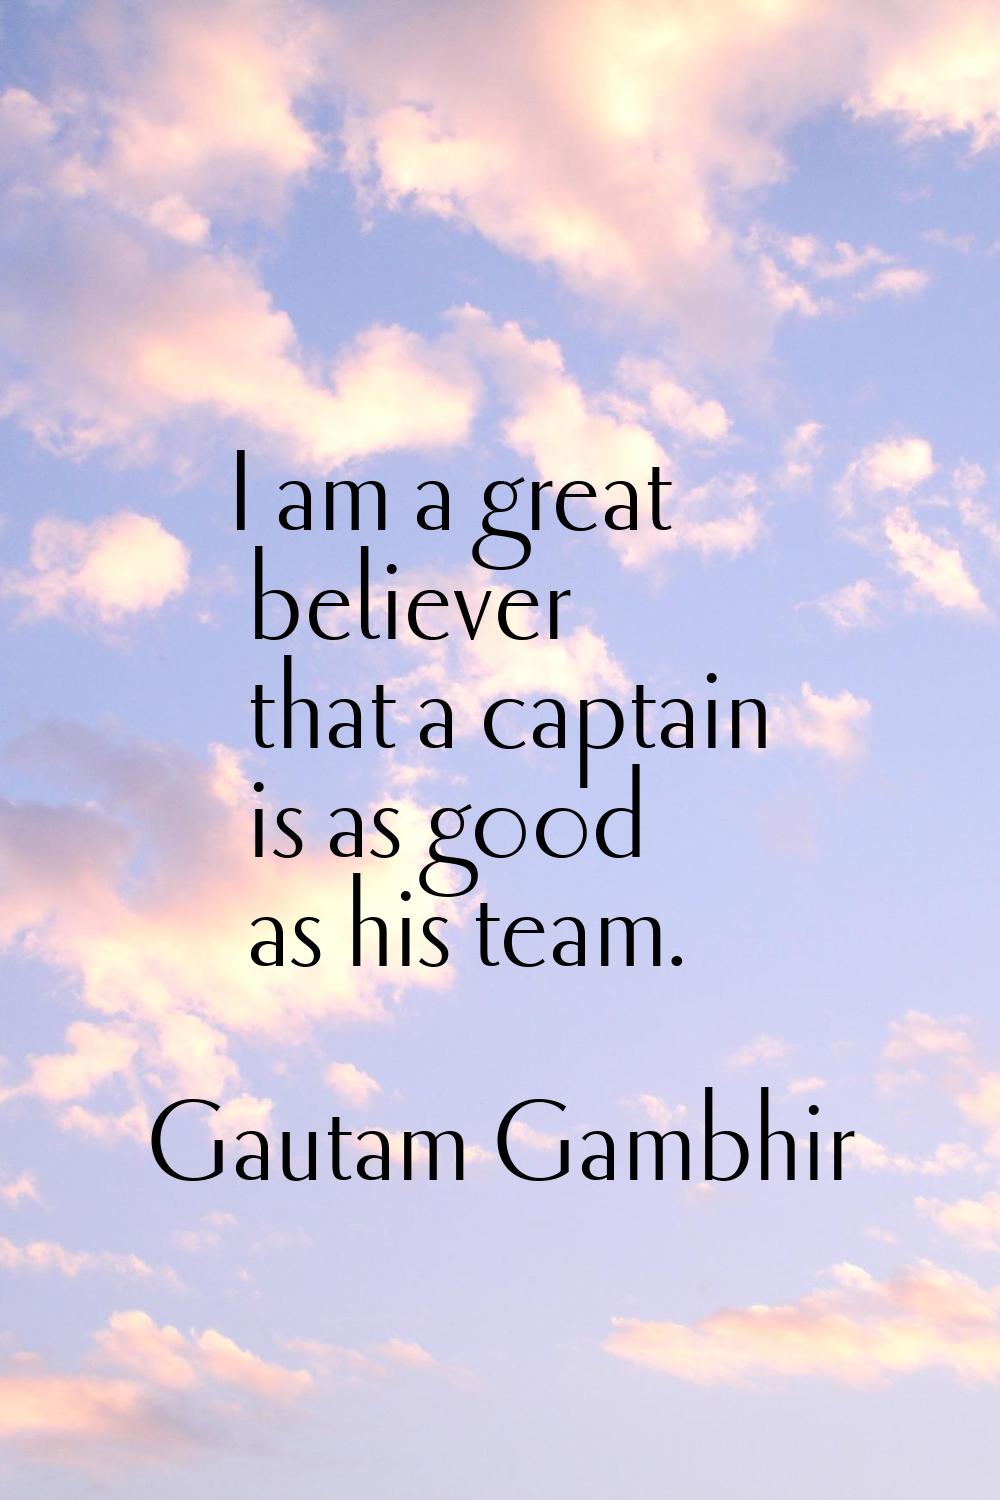 I am a great believer that a captain is as good as his team.